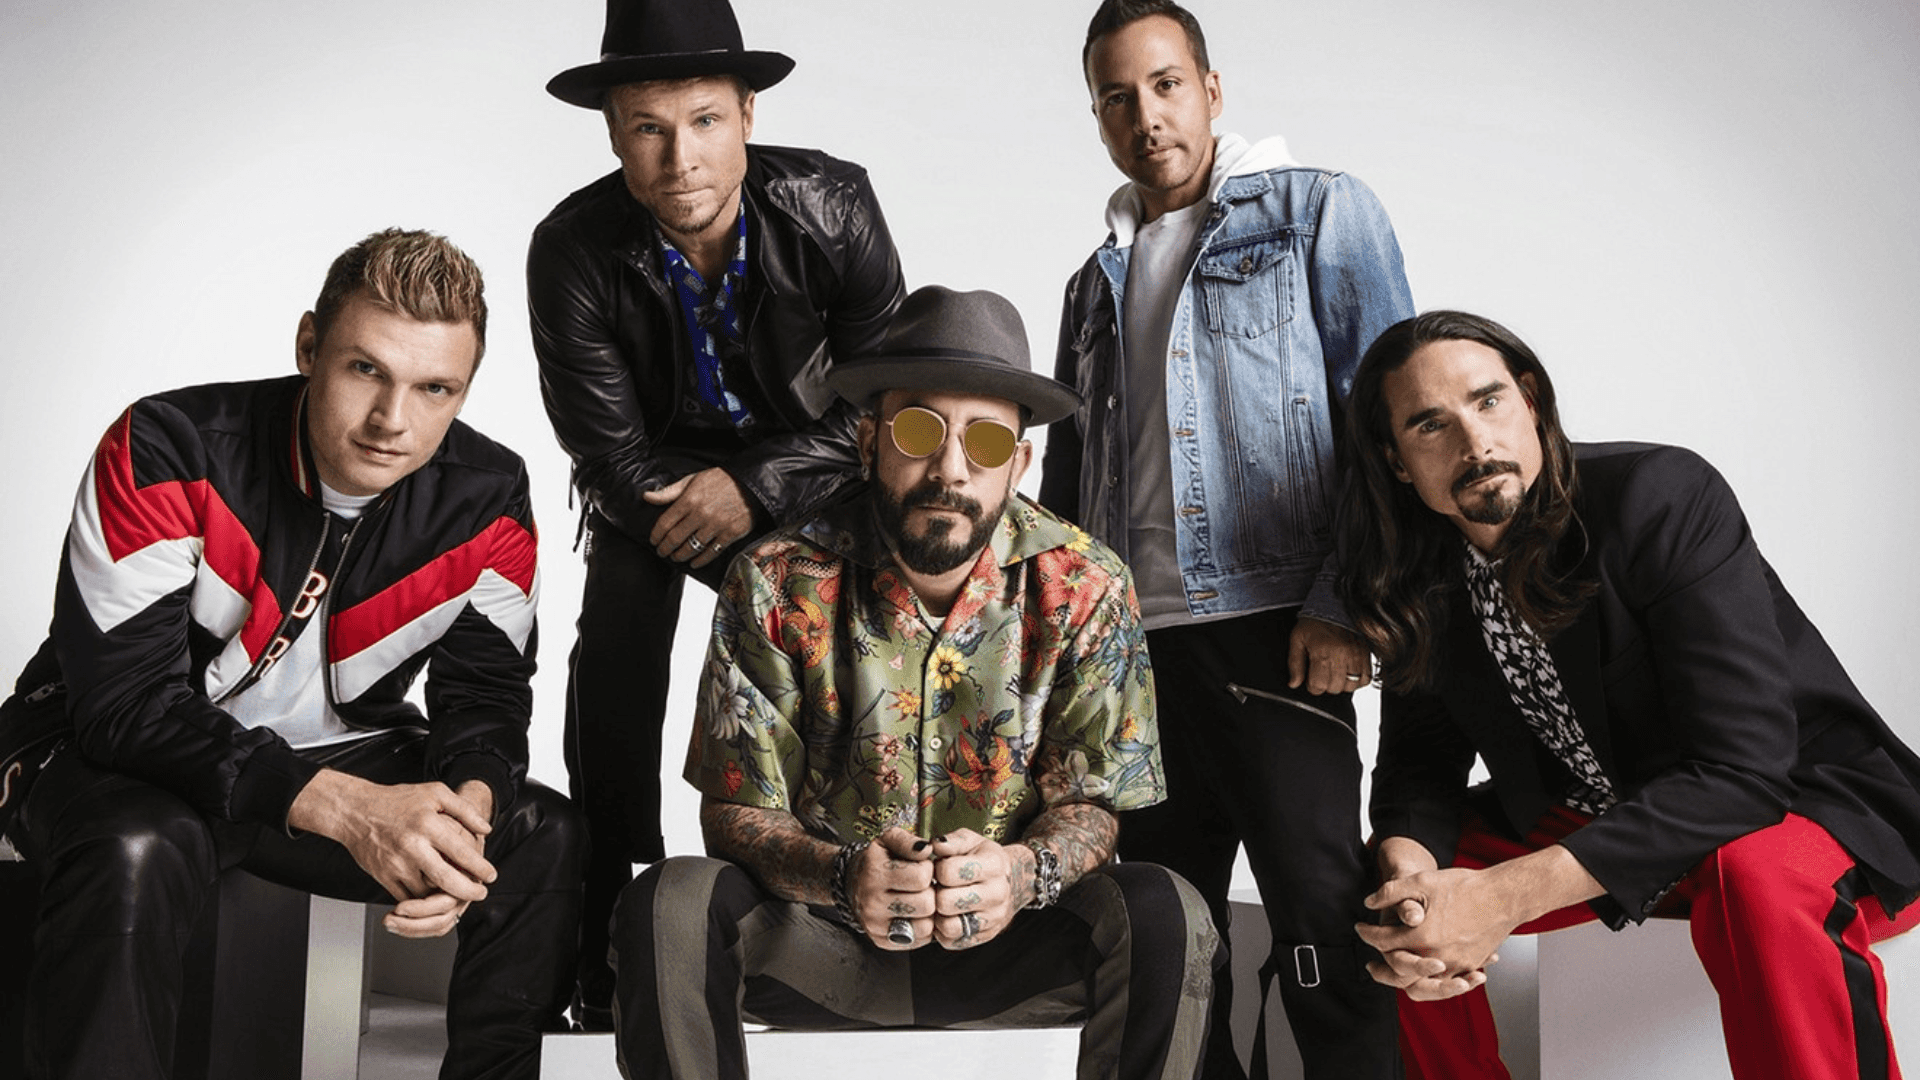 Join the fun with the Backstreet Boys!